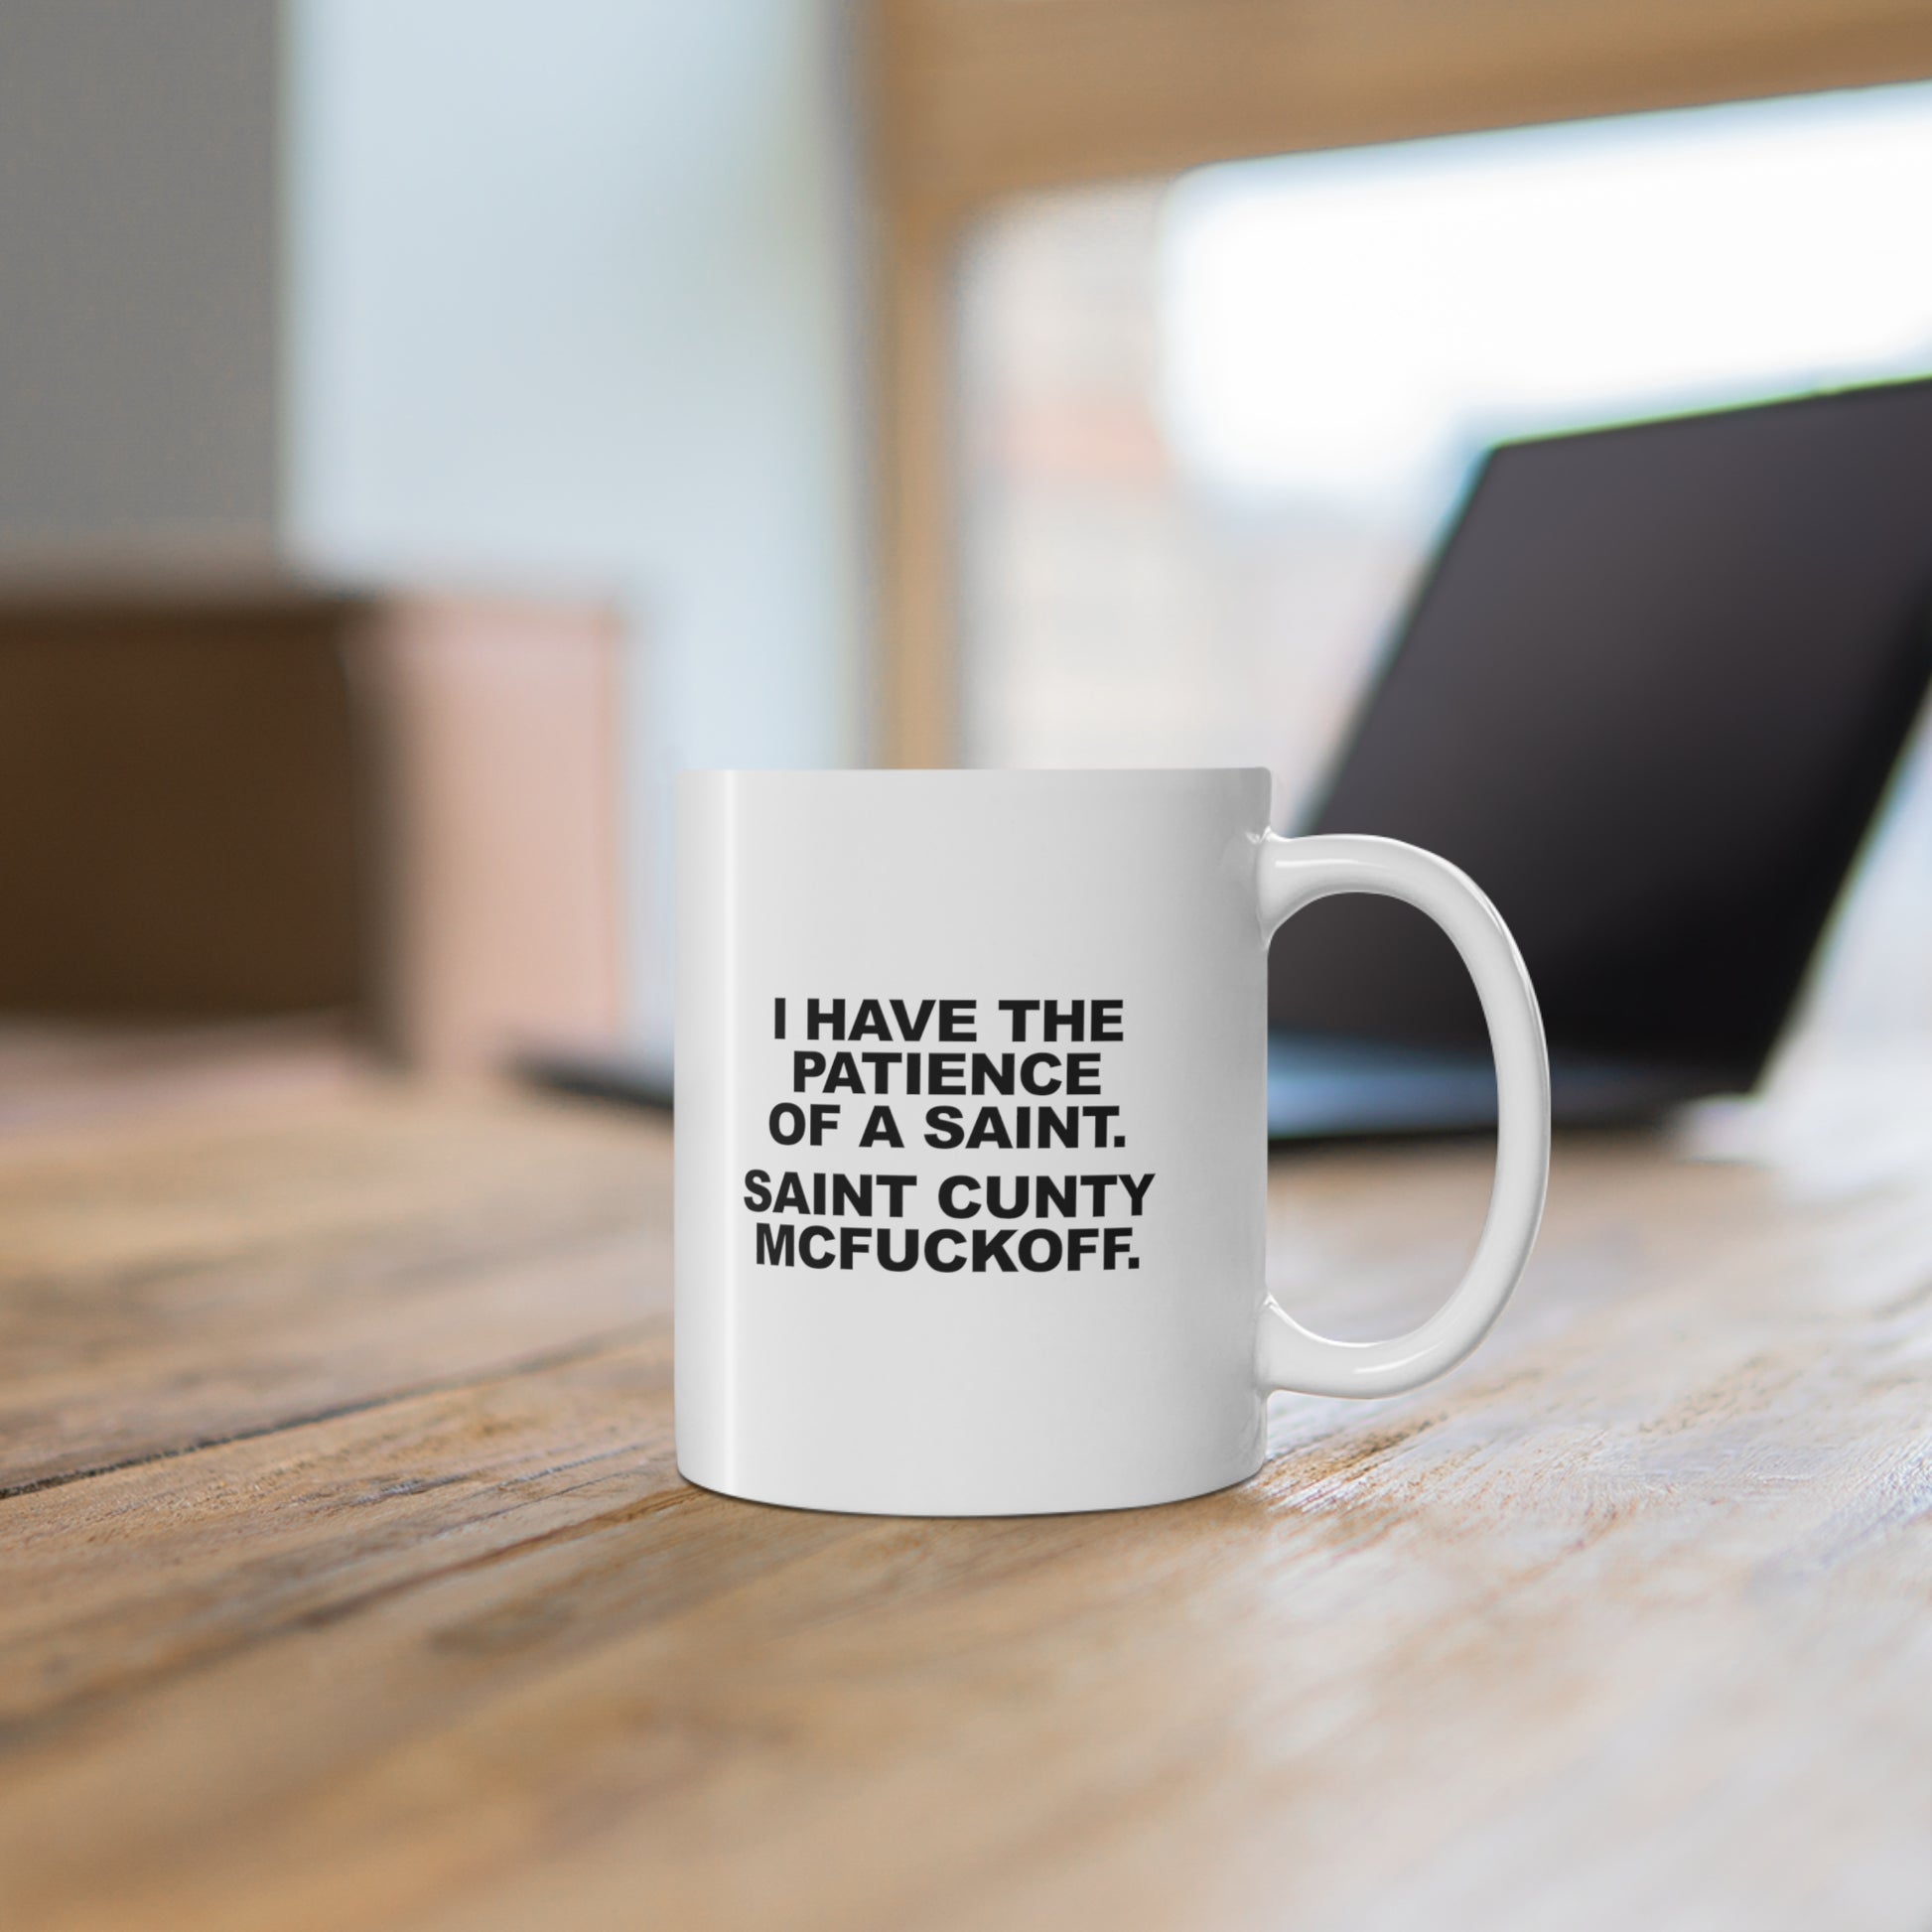 11oz ceramic mug with quote I Have The Patience of a Saint Saint Cunty McFuckoff